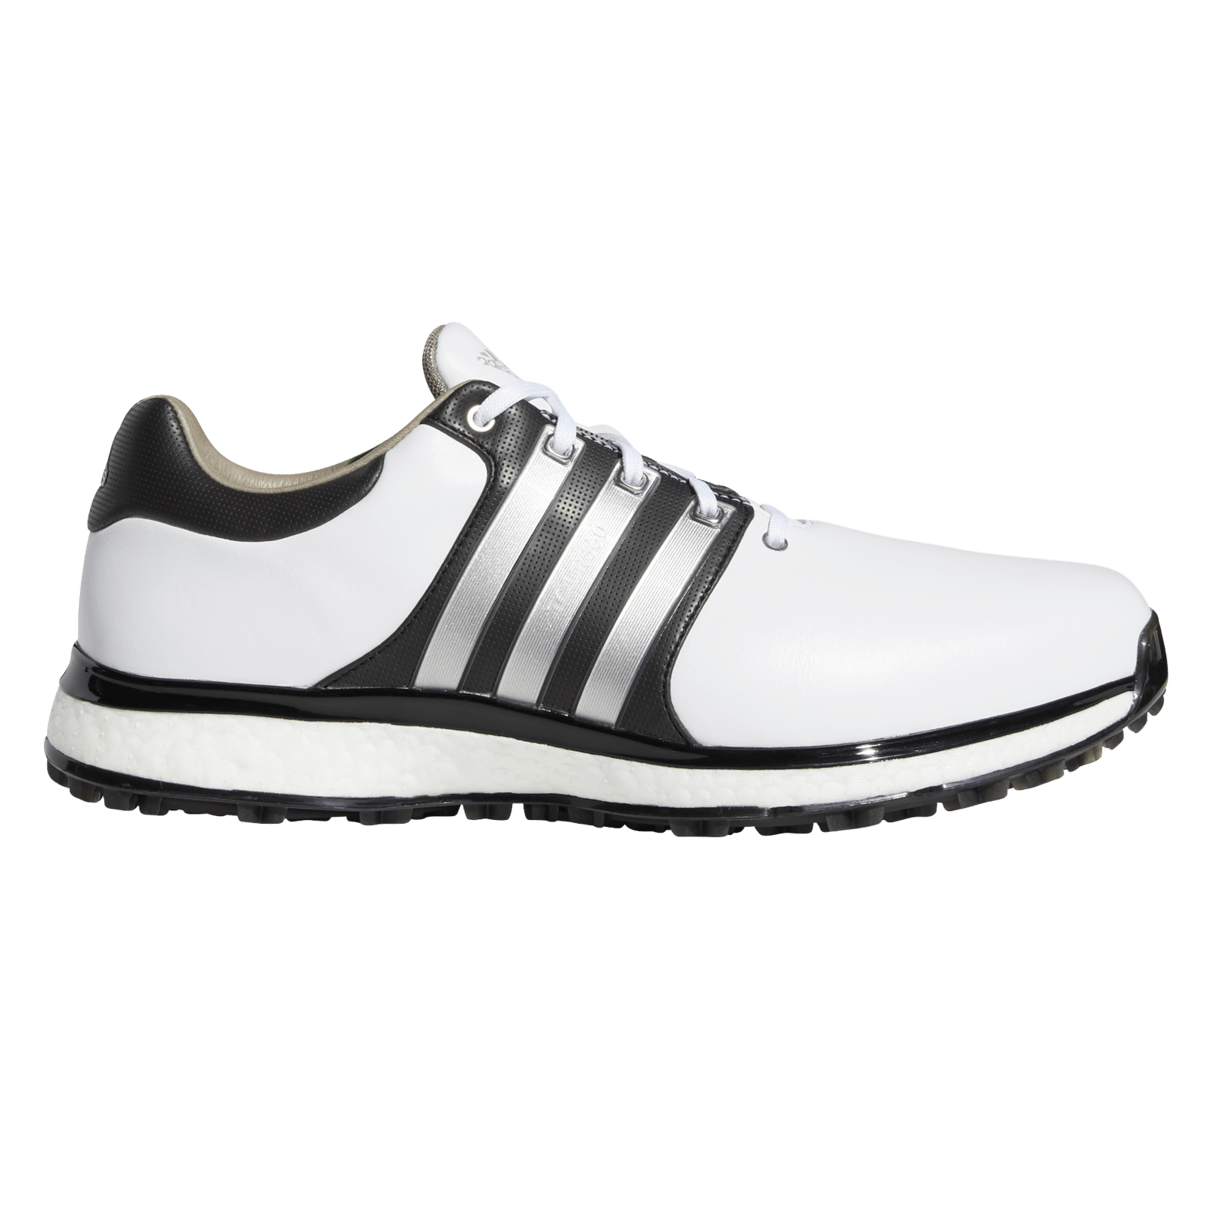 adidas mens golf shoes clearance